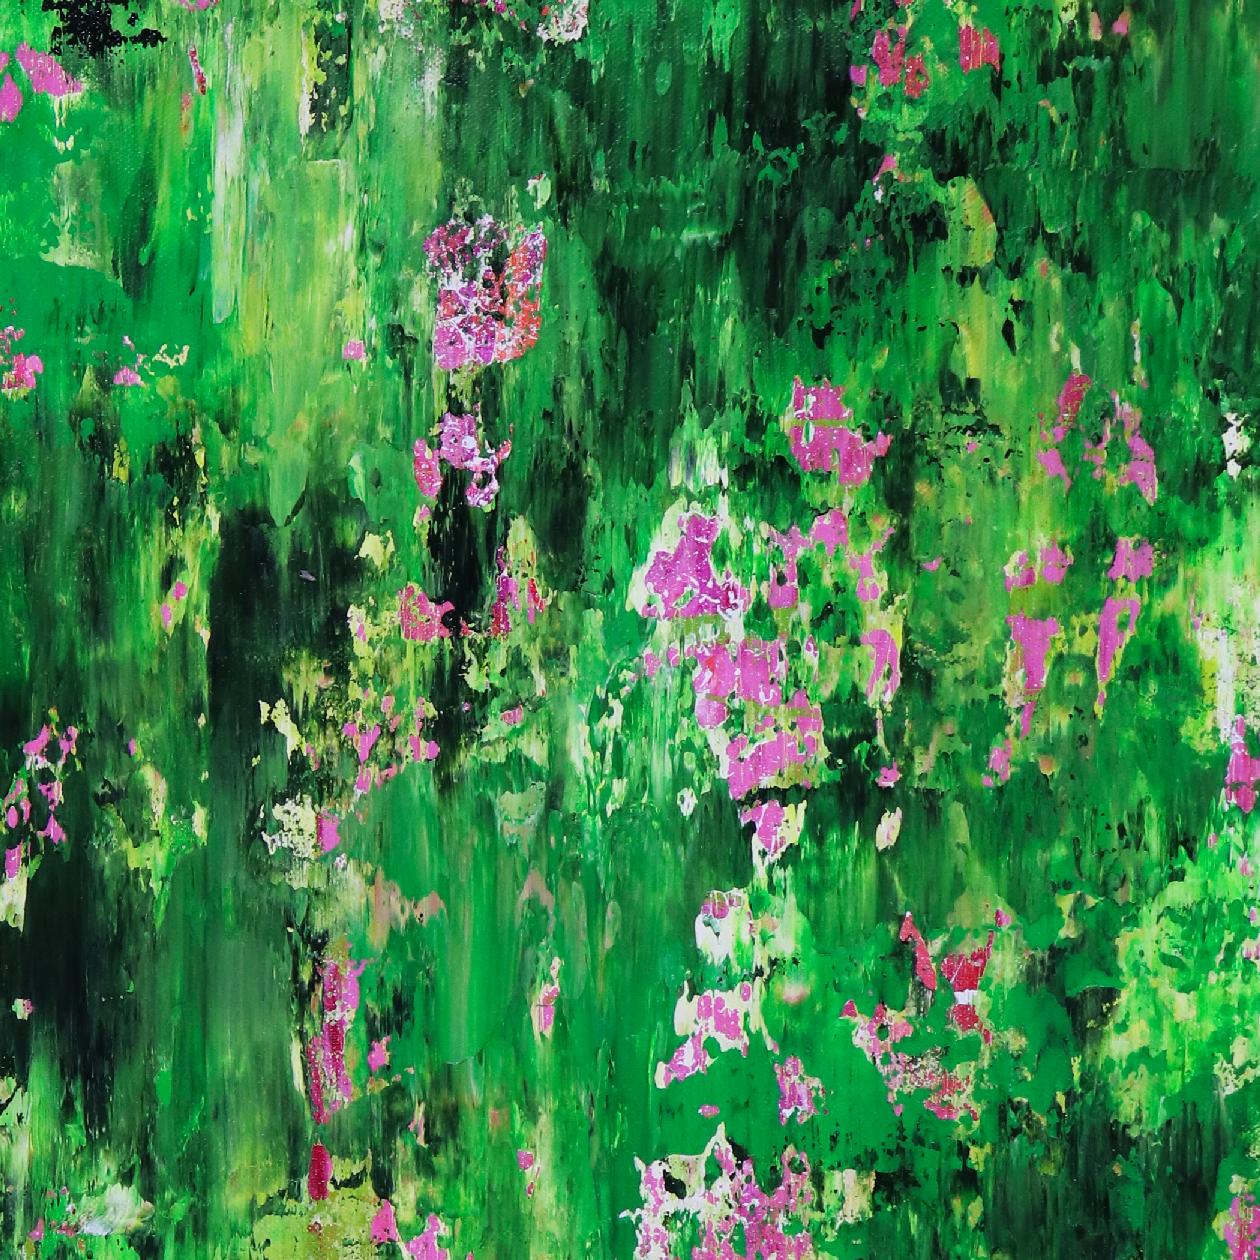 DETAIL - Verdor (A Romance With Green) 3 by Nestor Toro / SOLD